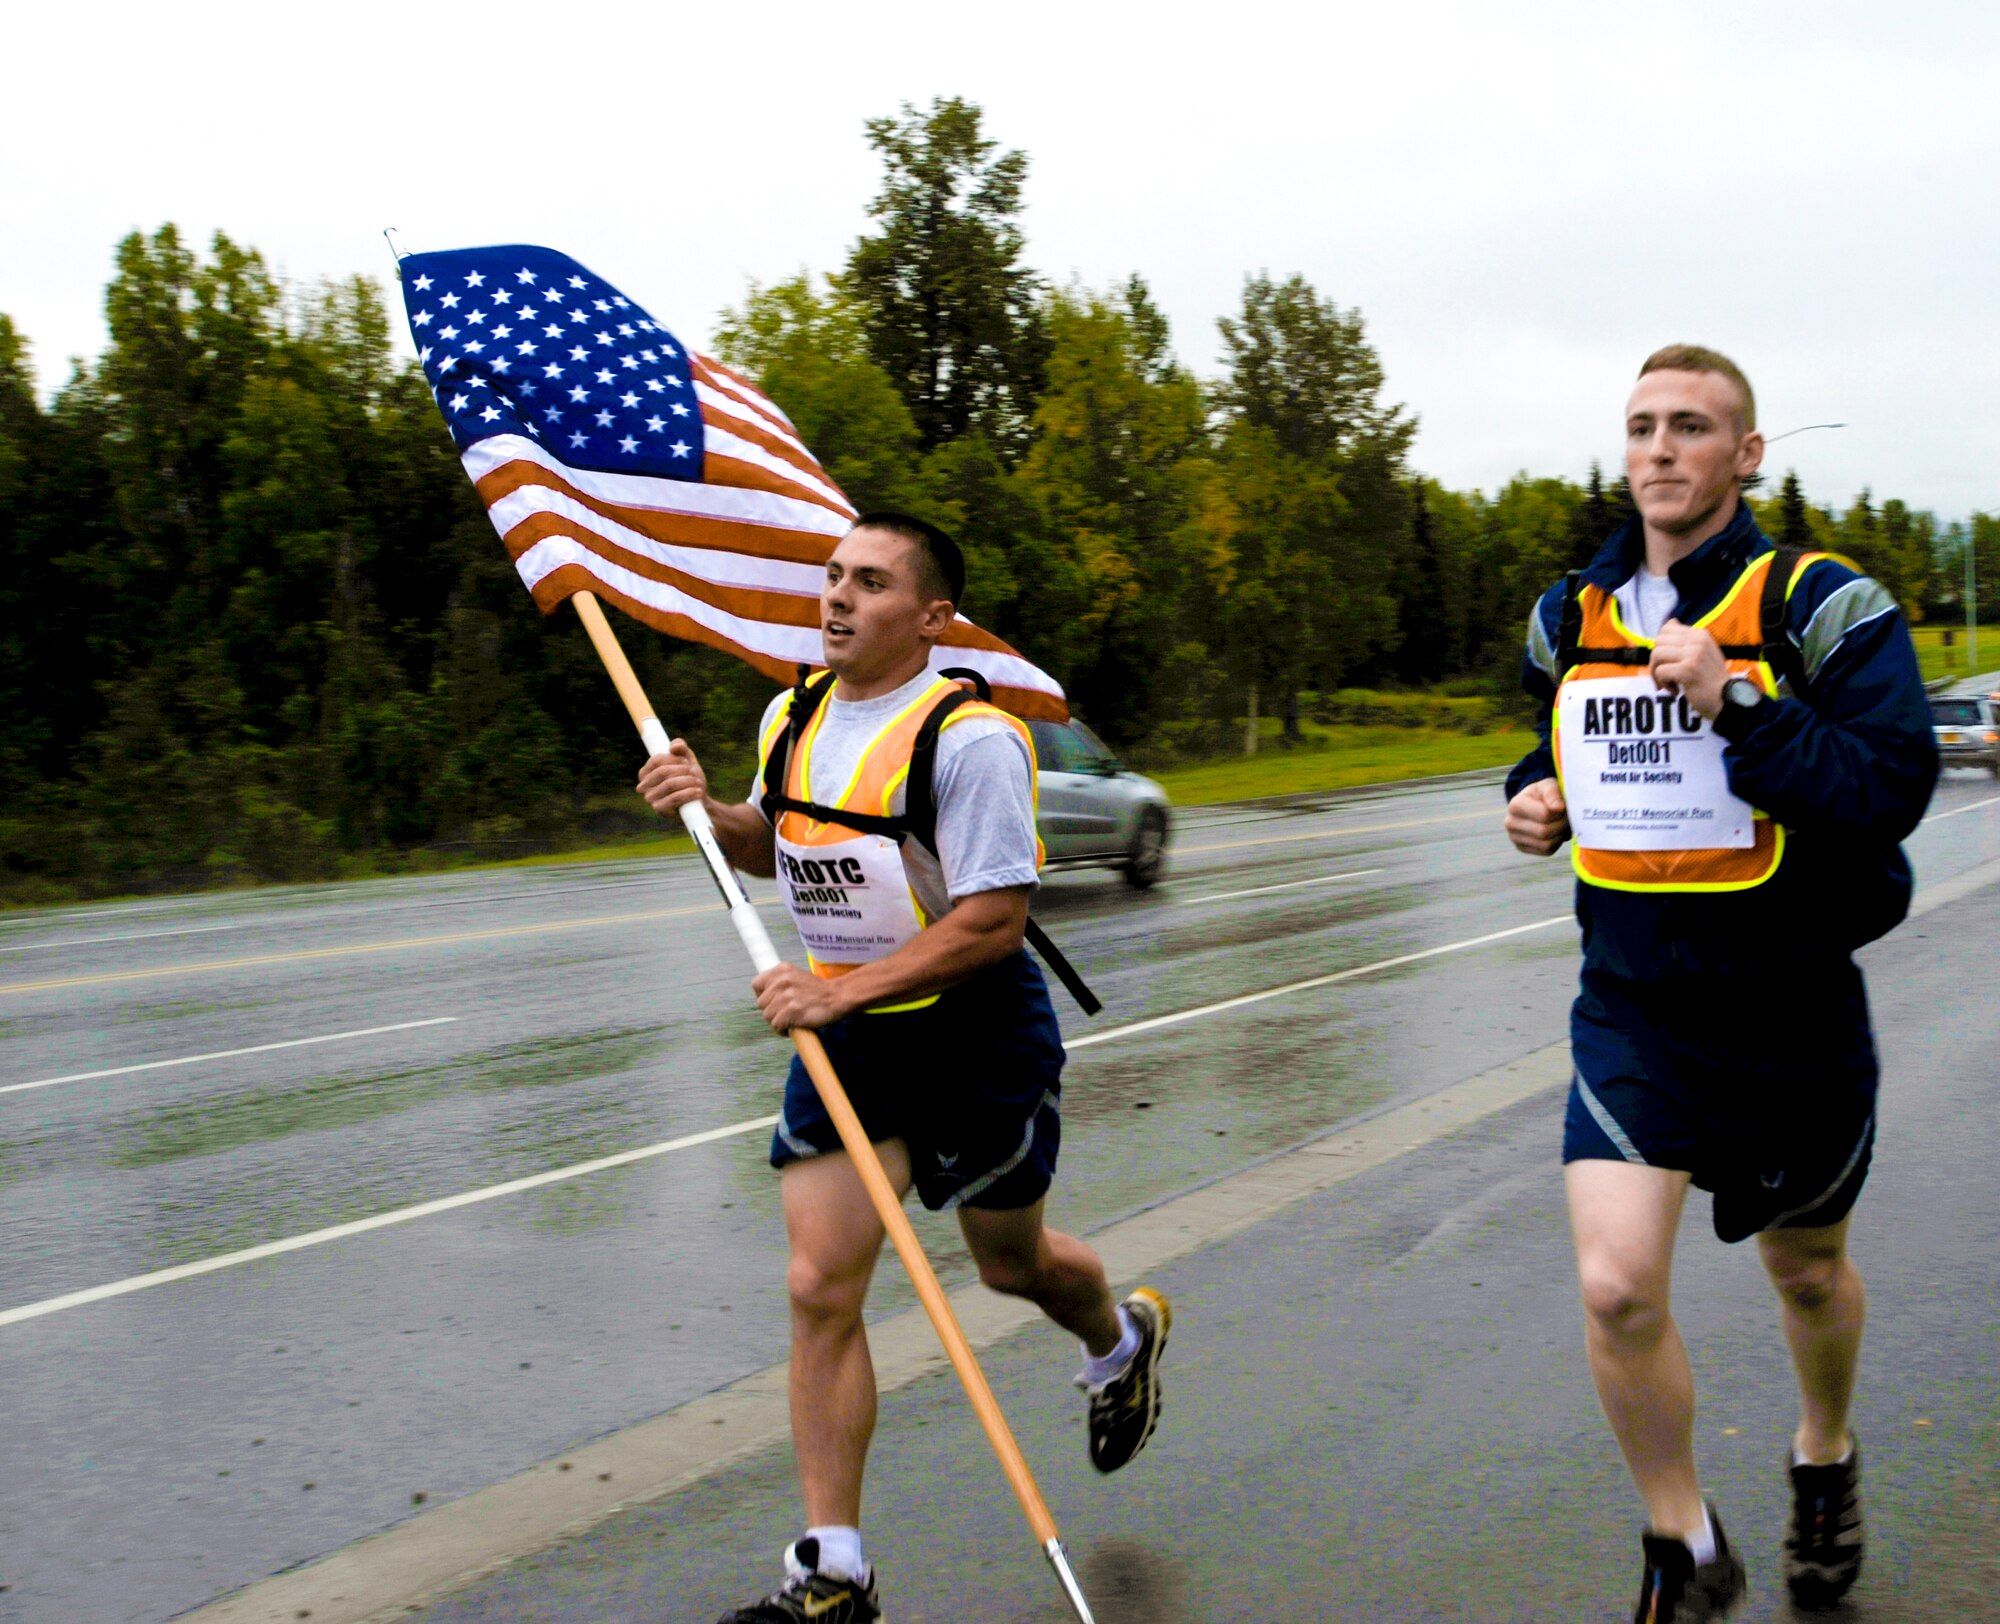 ELMENDORF AIR FORCE BASE, Alaska?Air Force Cadets Maj. Micheal Blahut and 1st Lt. Tyler Siegal from the University of Alaska, Anchorage kick off their 9-11 run Sept. 12. The run was organized to show support of the Armed Forces fighting terrorism and in remembrance 9-11. The run lasted 24 hours with nearly 100 runners taking shifts of 30 minutes. (U.S. Air Force photo/Senior Airman Matthew Owens)